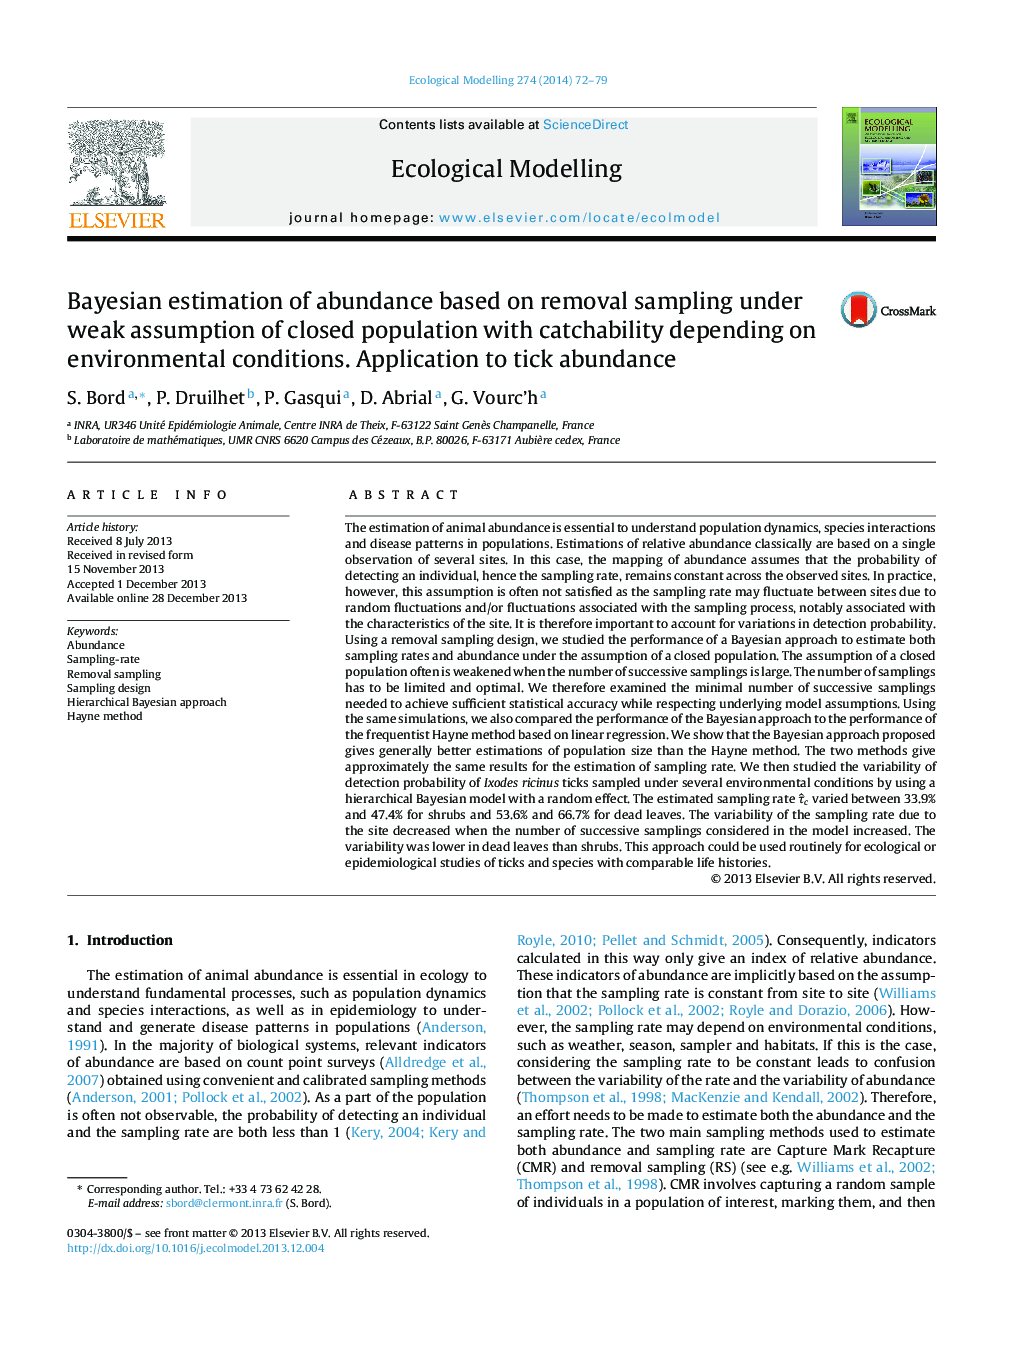 Bayesian estimation of abundance based on removal sampling under weak assumption of closed population with catchability depending on environmental conditions. Application to tick abundance